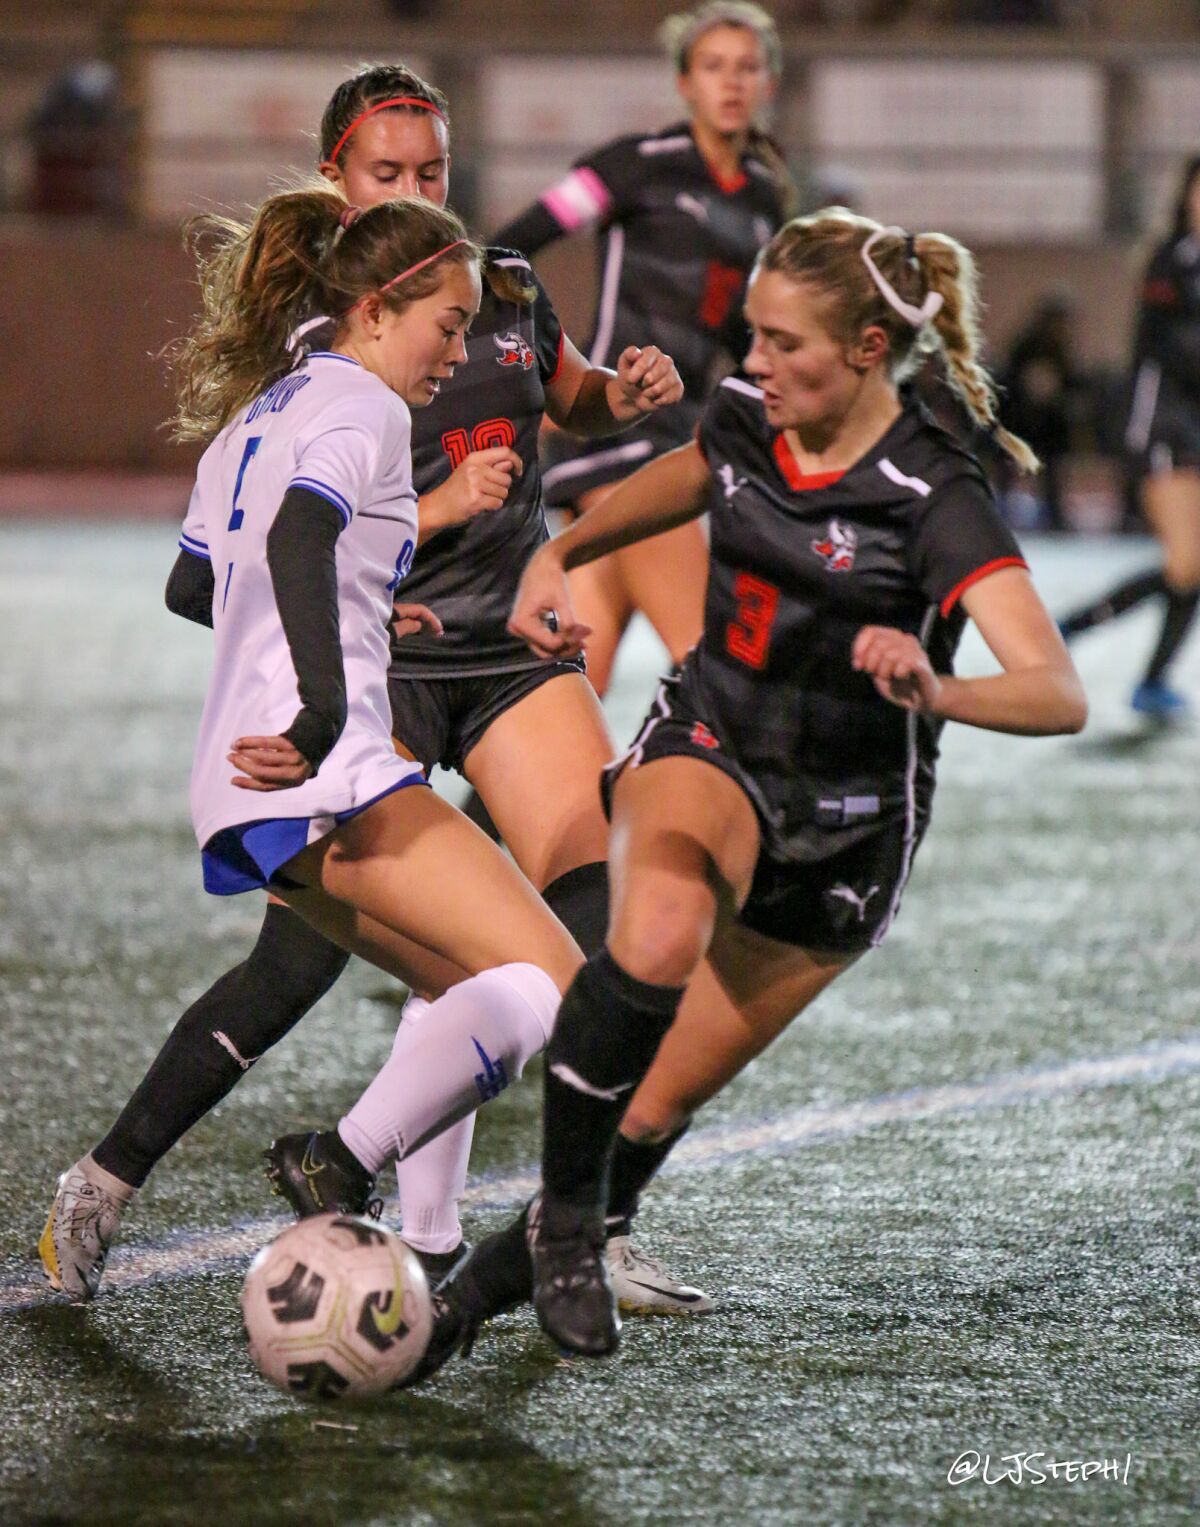 Vikings (in black) fight for the ball during a recent La Jolla High School soccer match.